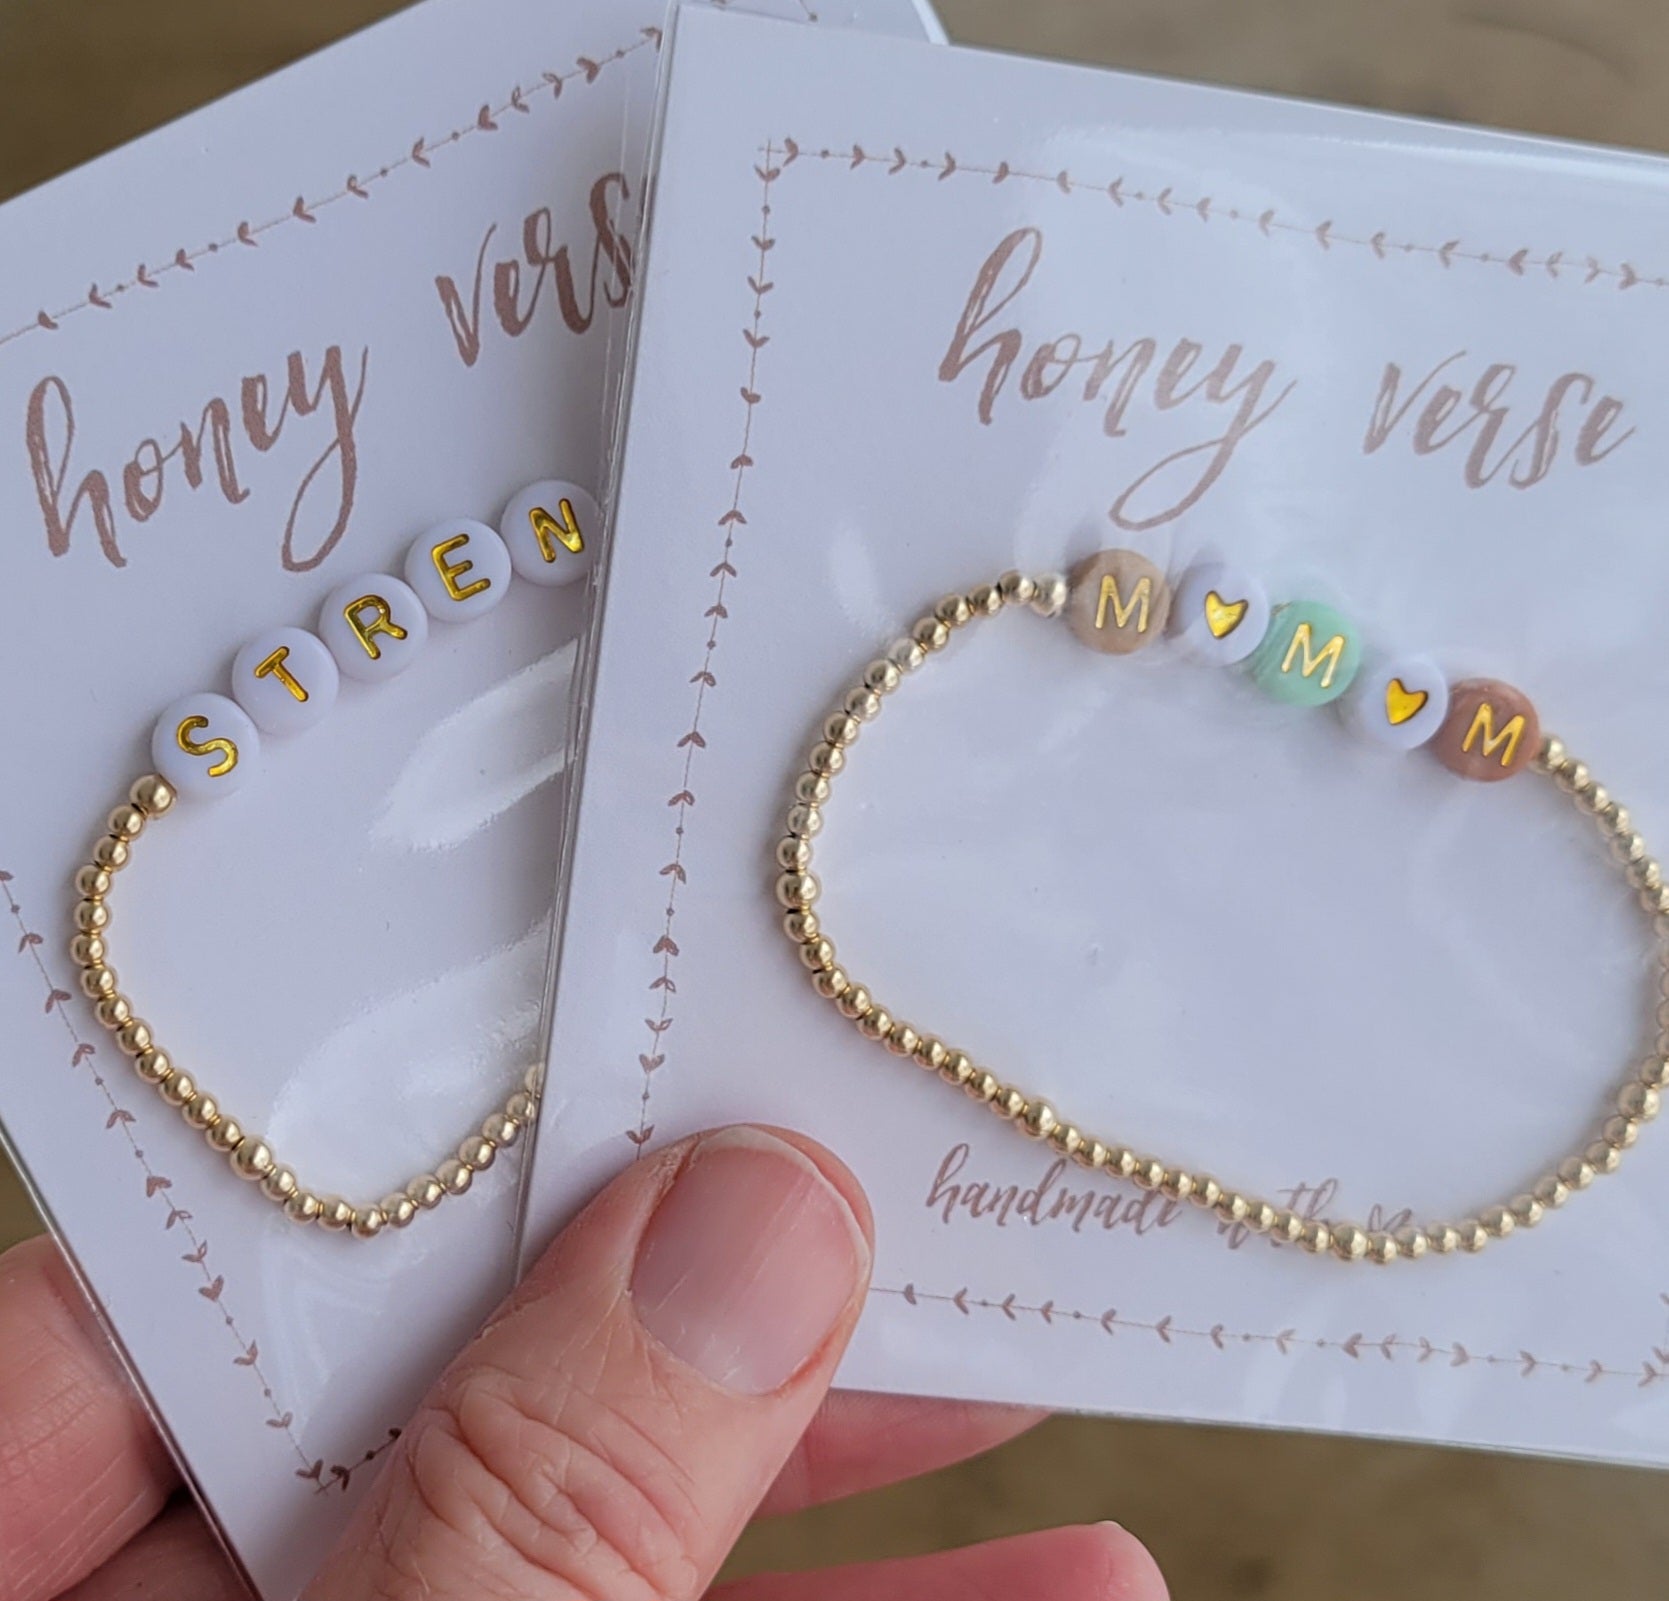 Gold-filled Beaded name or word bracelet for stacking - shown in packaging honey verse card